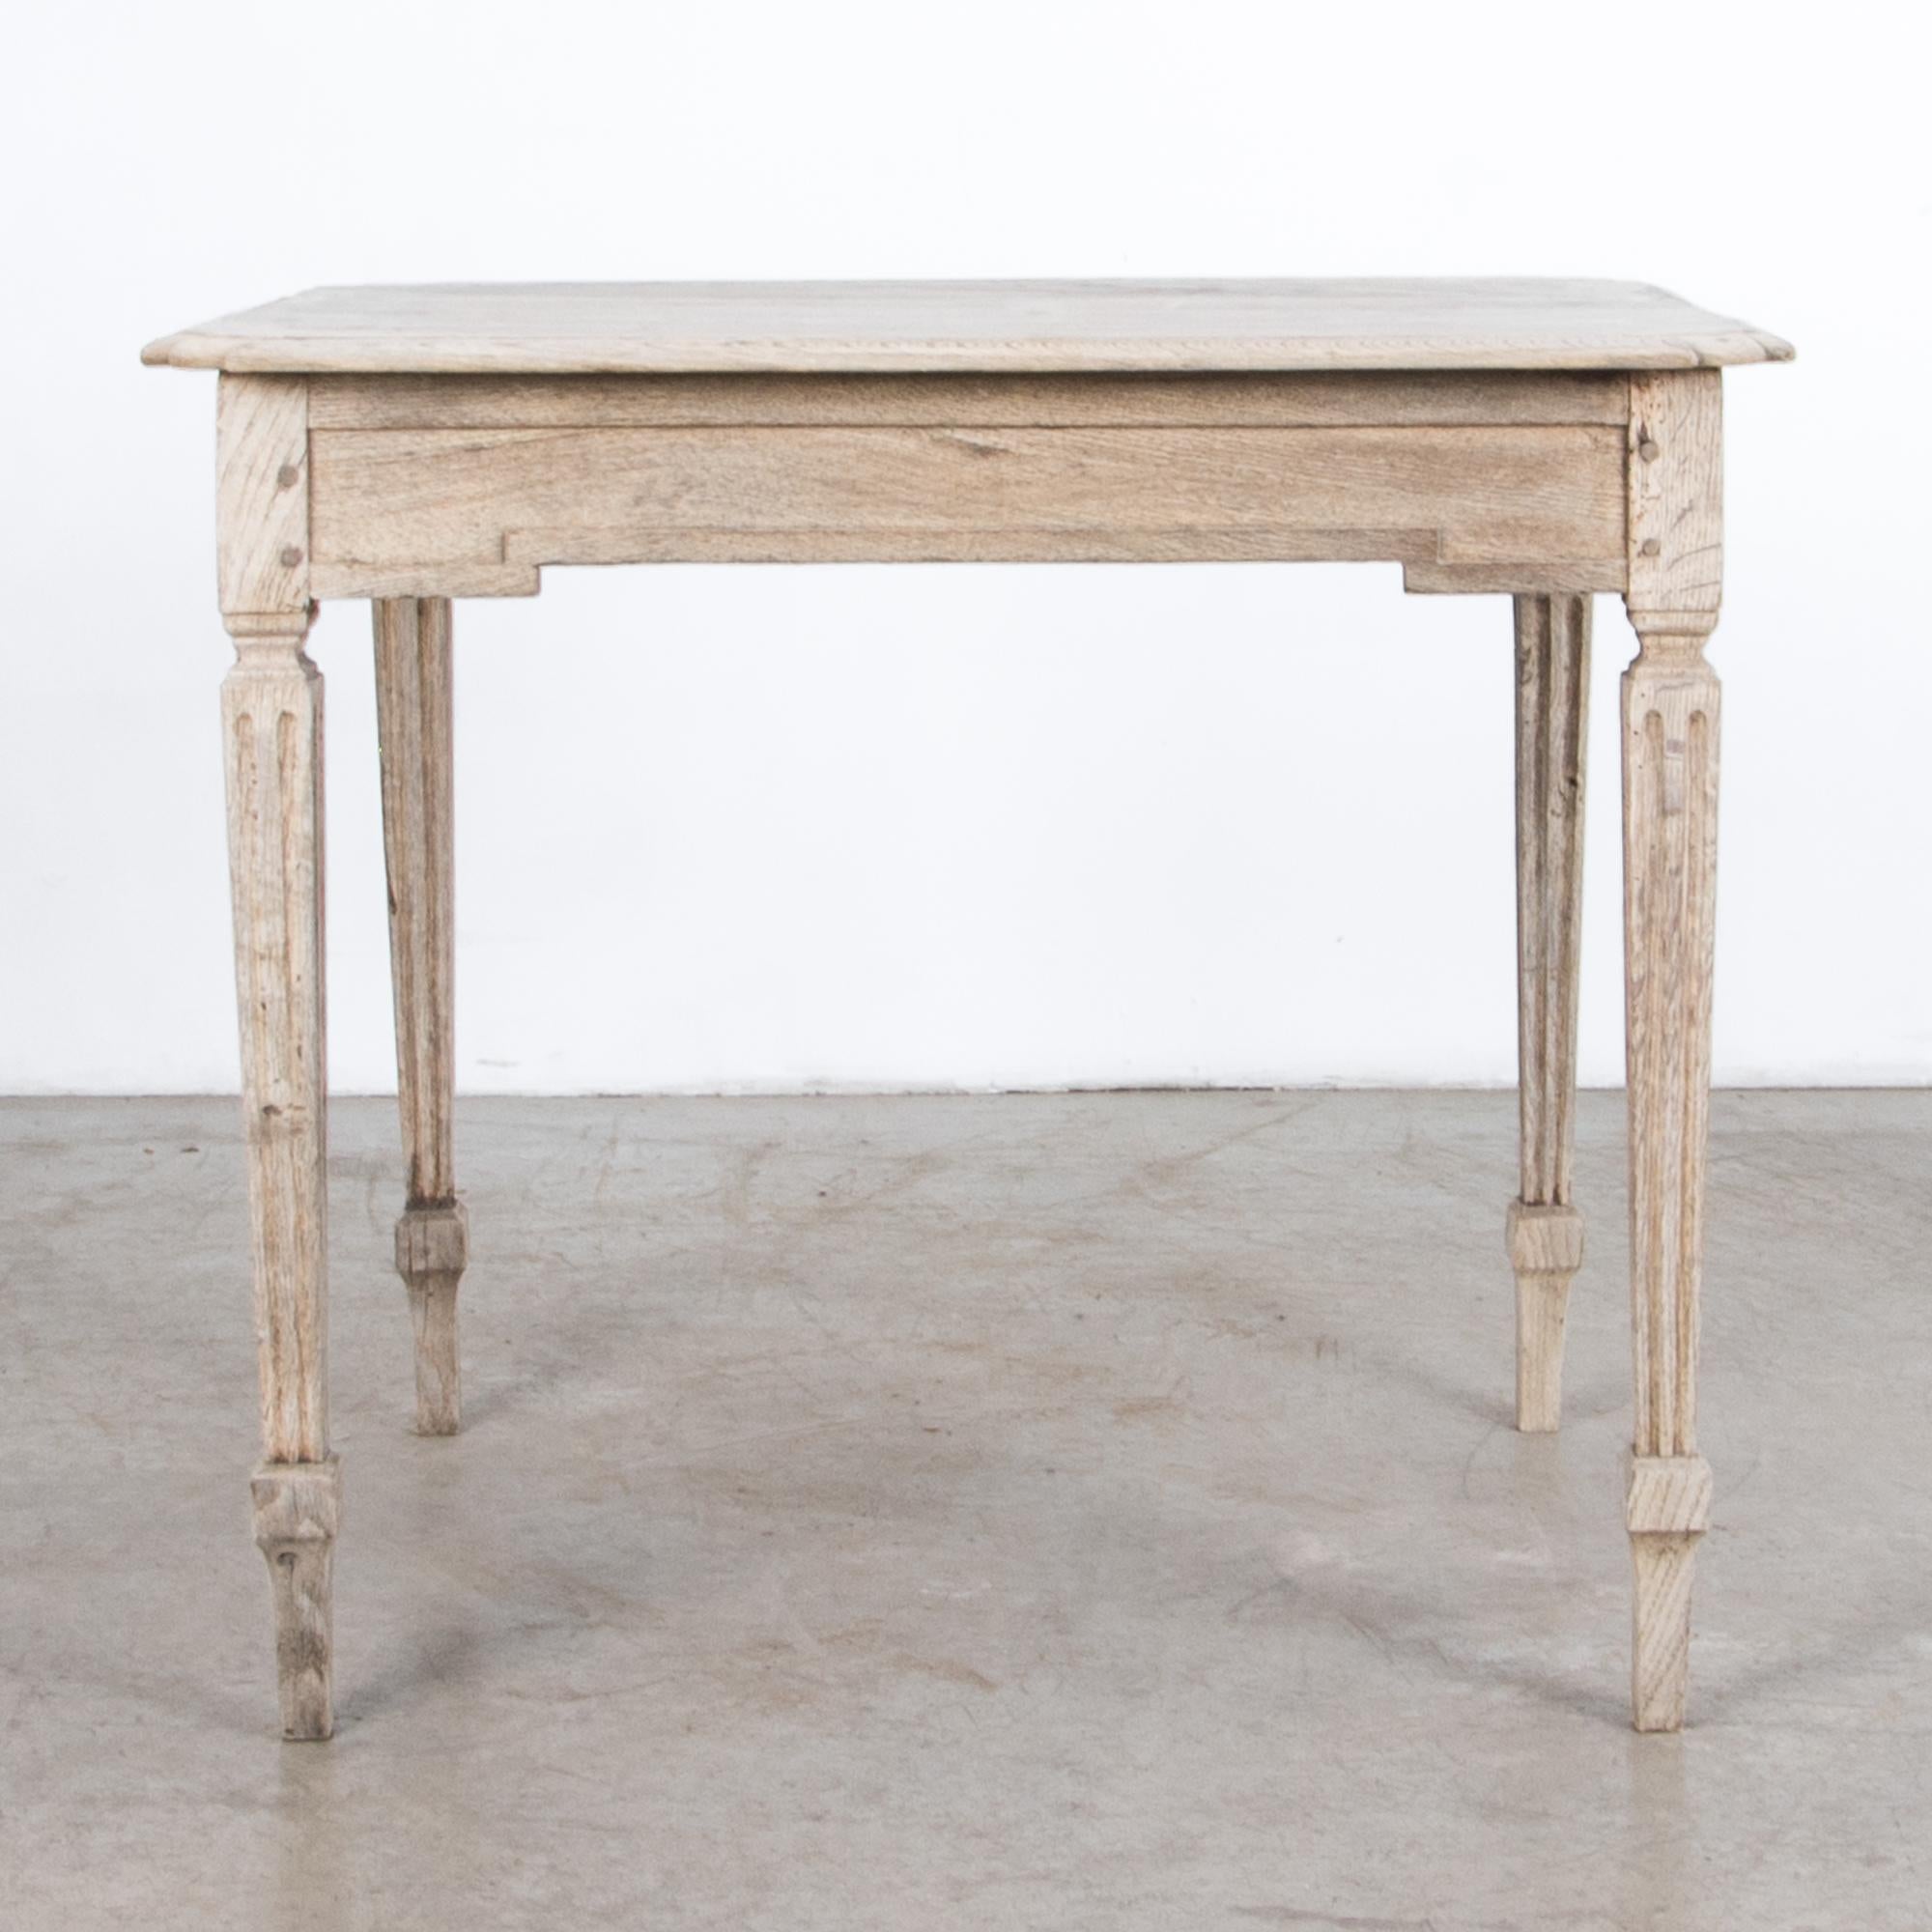 Carved with distinctive geometric motif in textured bleached oak, a square side table from France, circa 1880. Influenced by the formal Louis XVI, this piece looks casual in rustic clear finish, showing the worn patina and beautiful wood grain. A